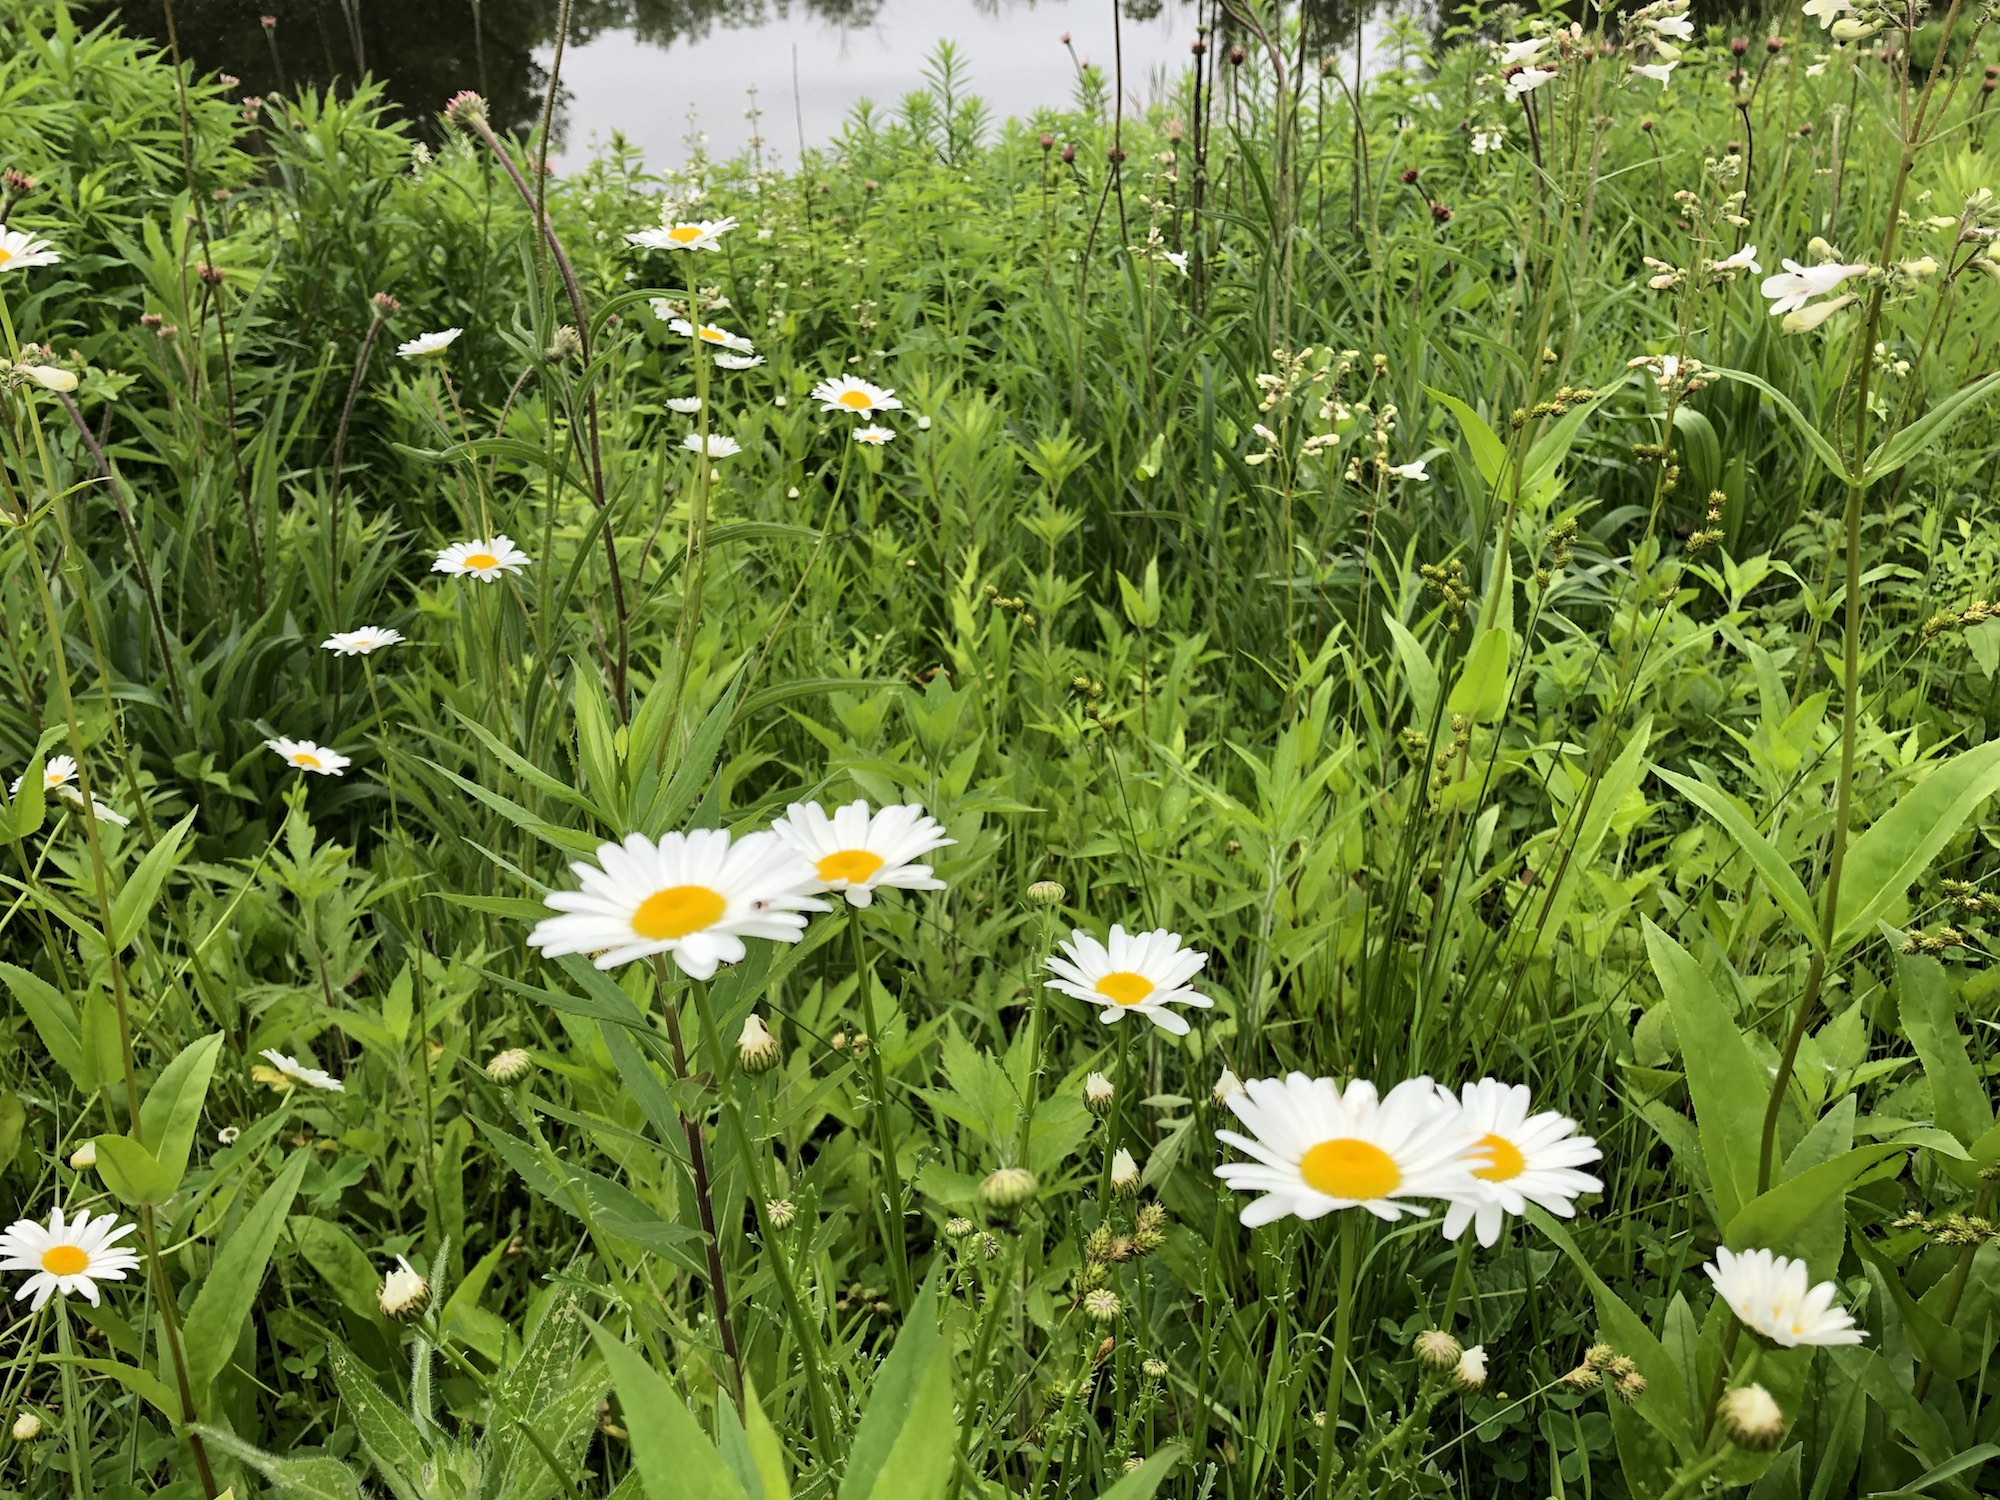 Ox-eye Daisies on bank of retaining pond at the corner of Manitou Way and Nakoma Road in Madison, Wisconsin on June 17, 2019.